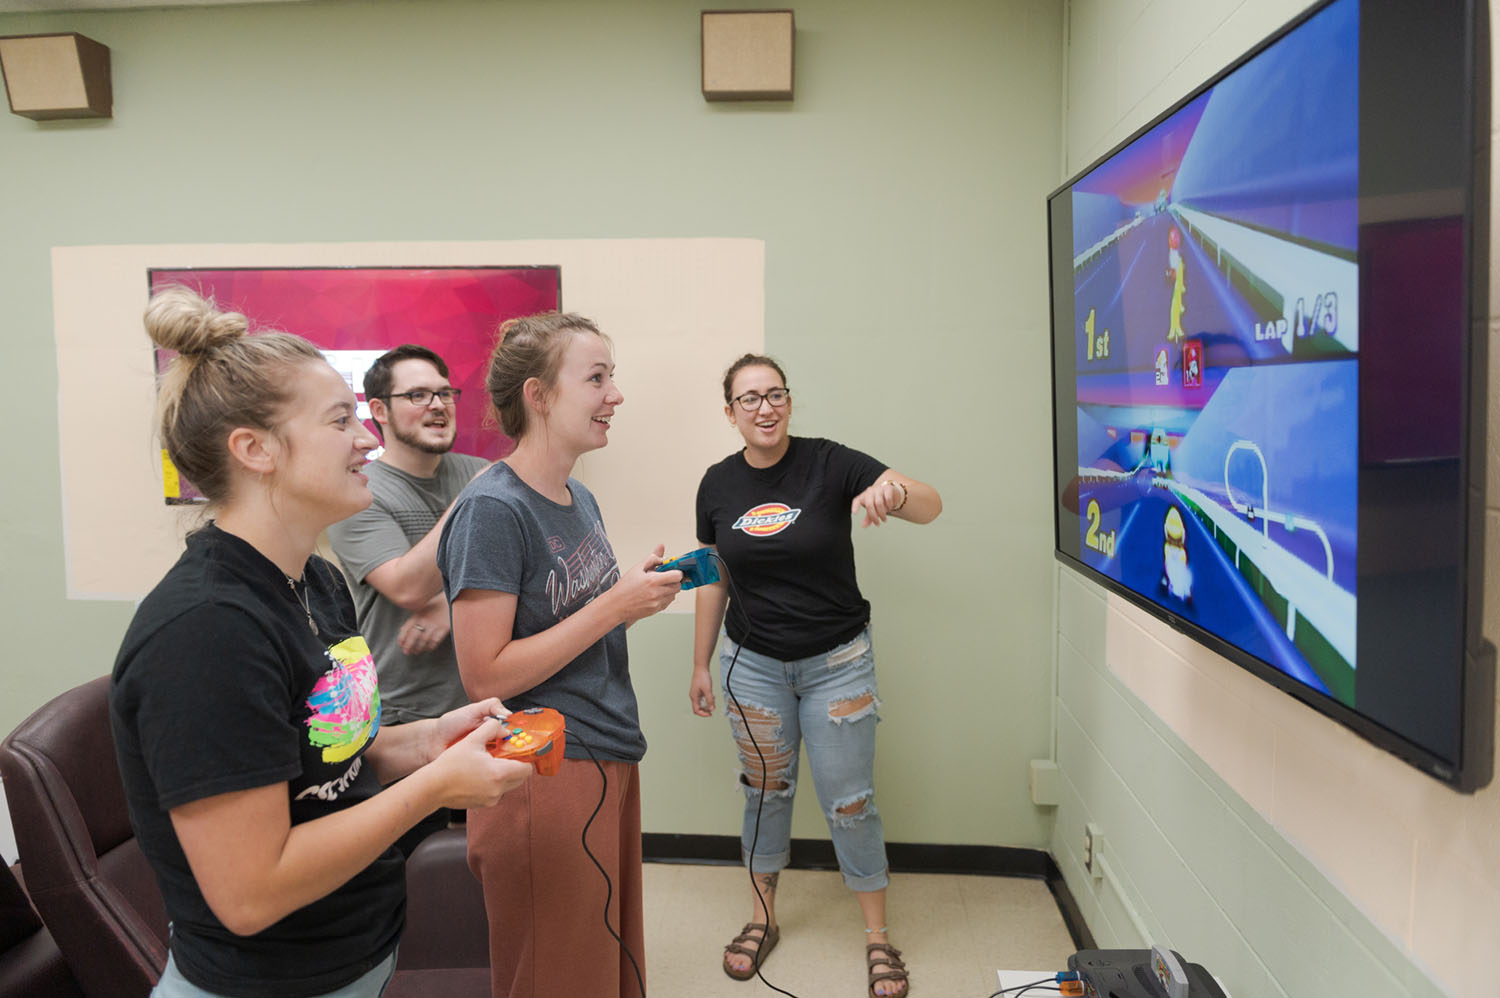 Students play a video game at the King Library